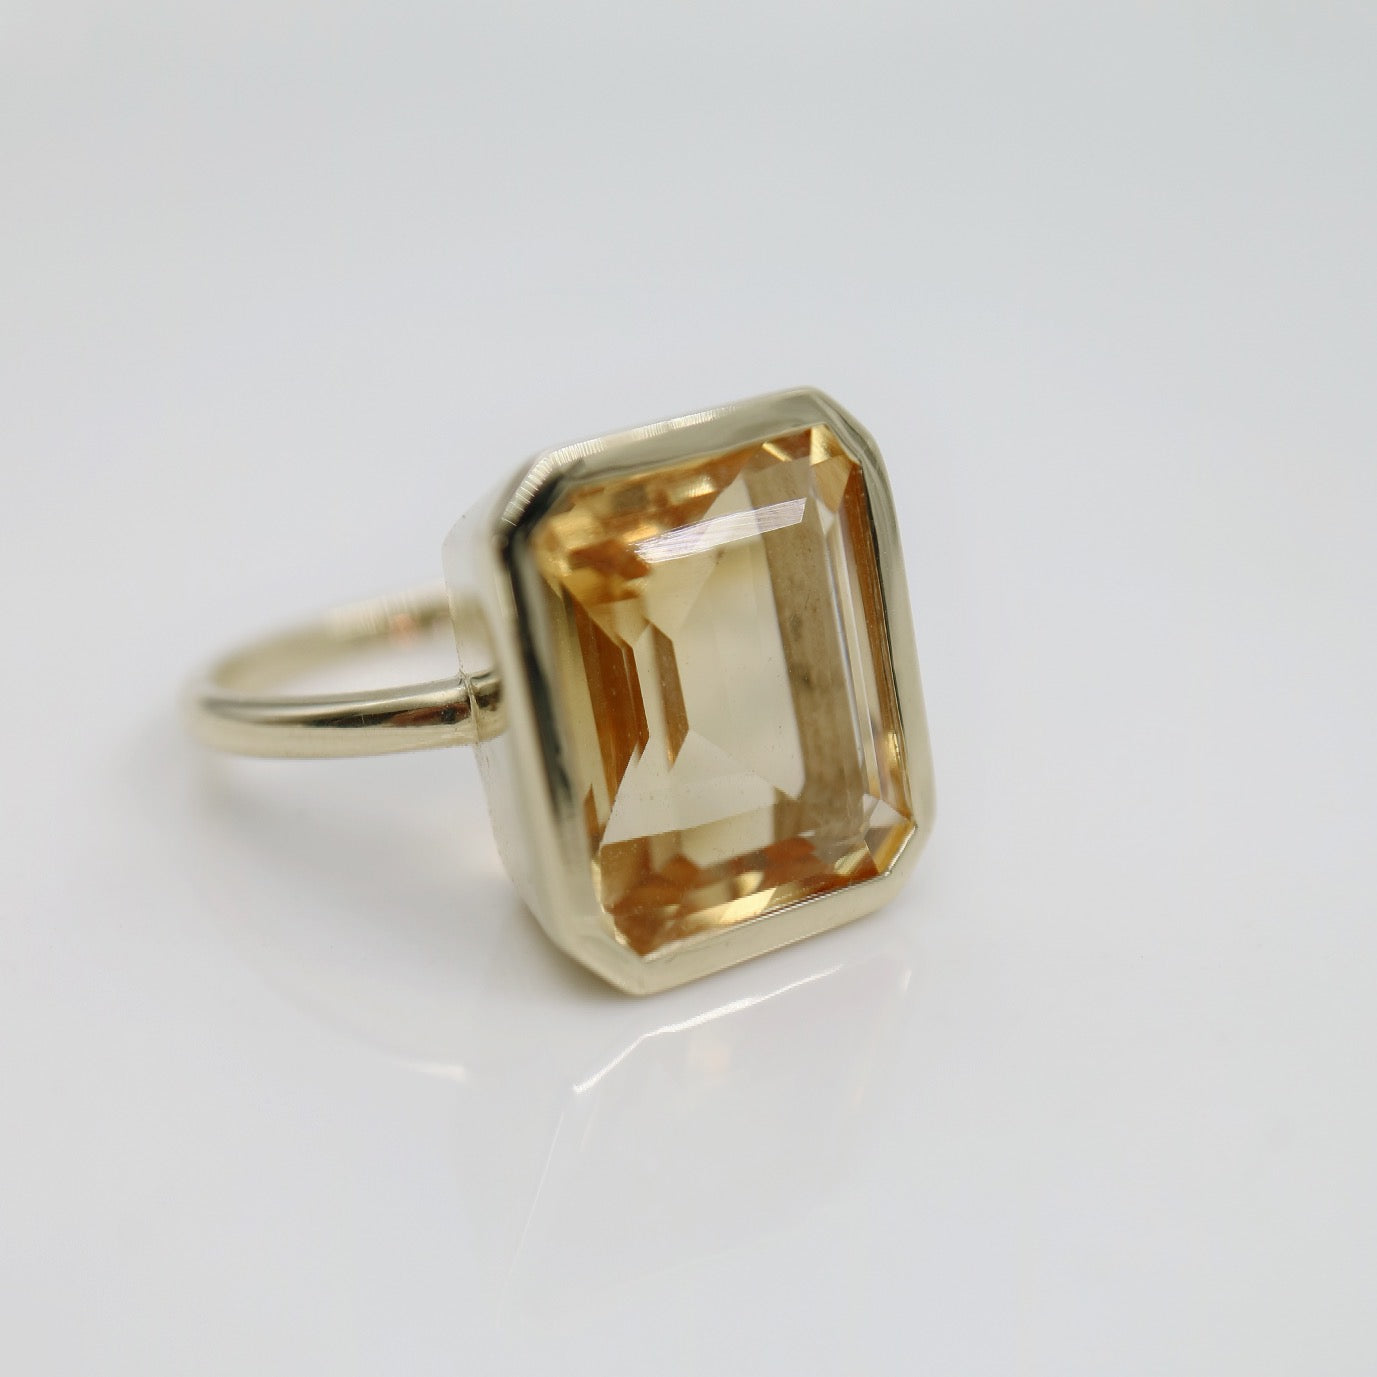 9ct gold ring with large citrine gemstone